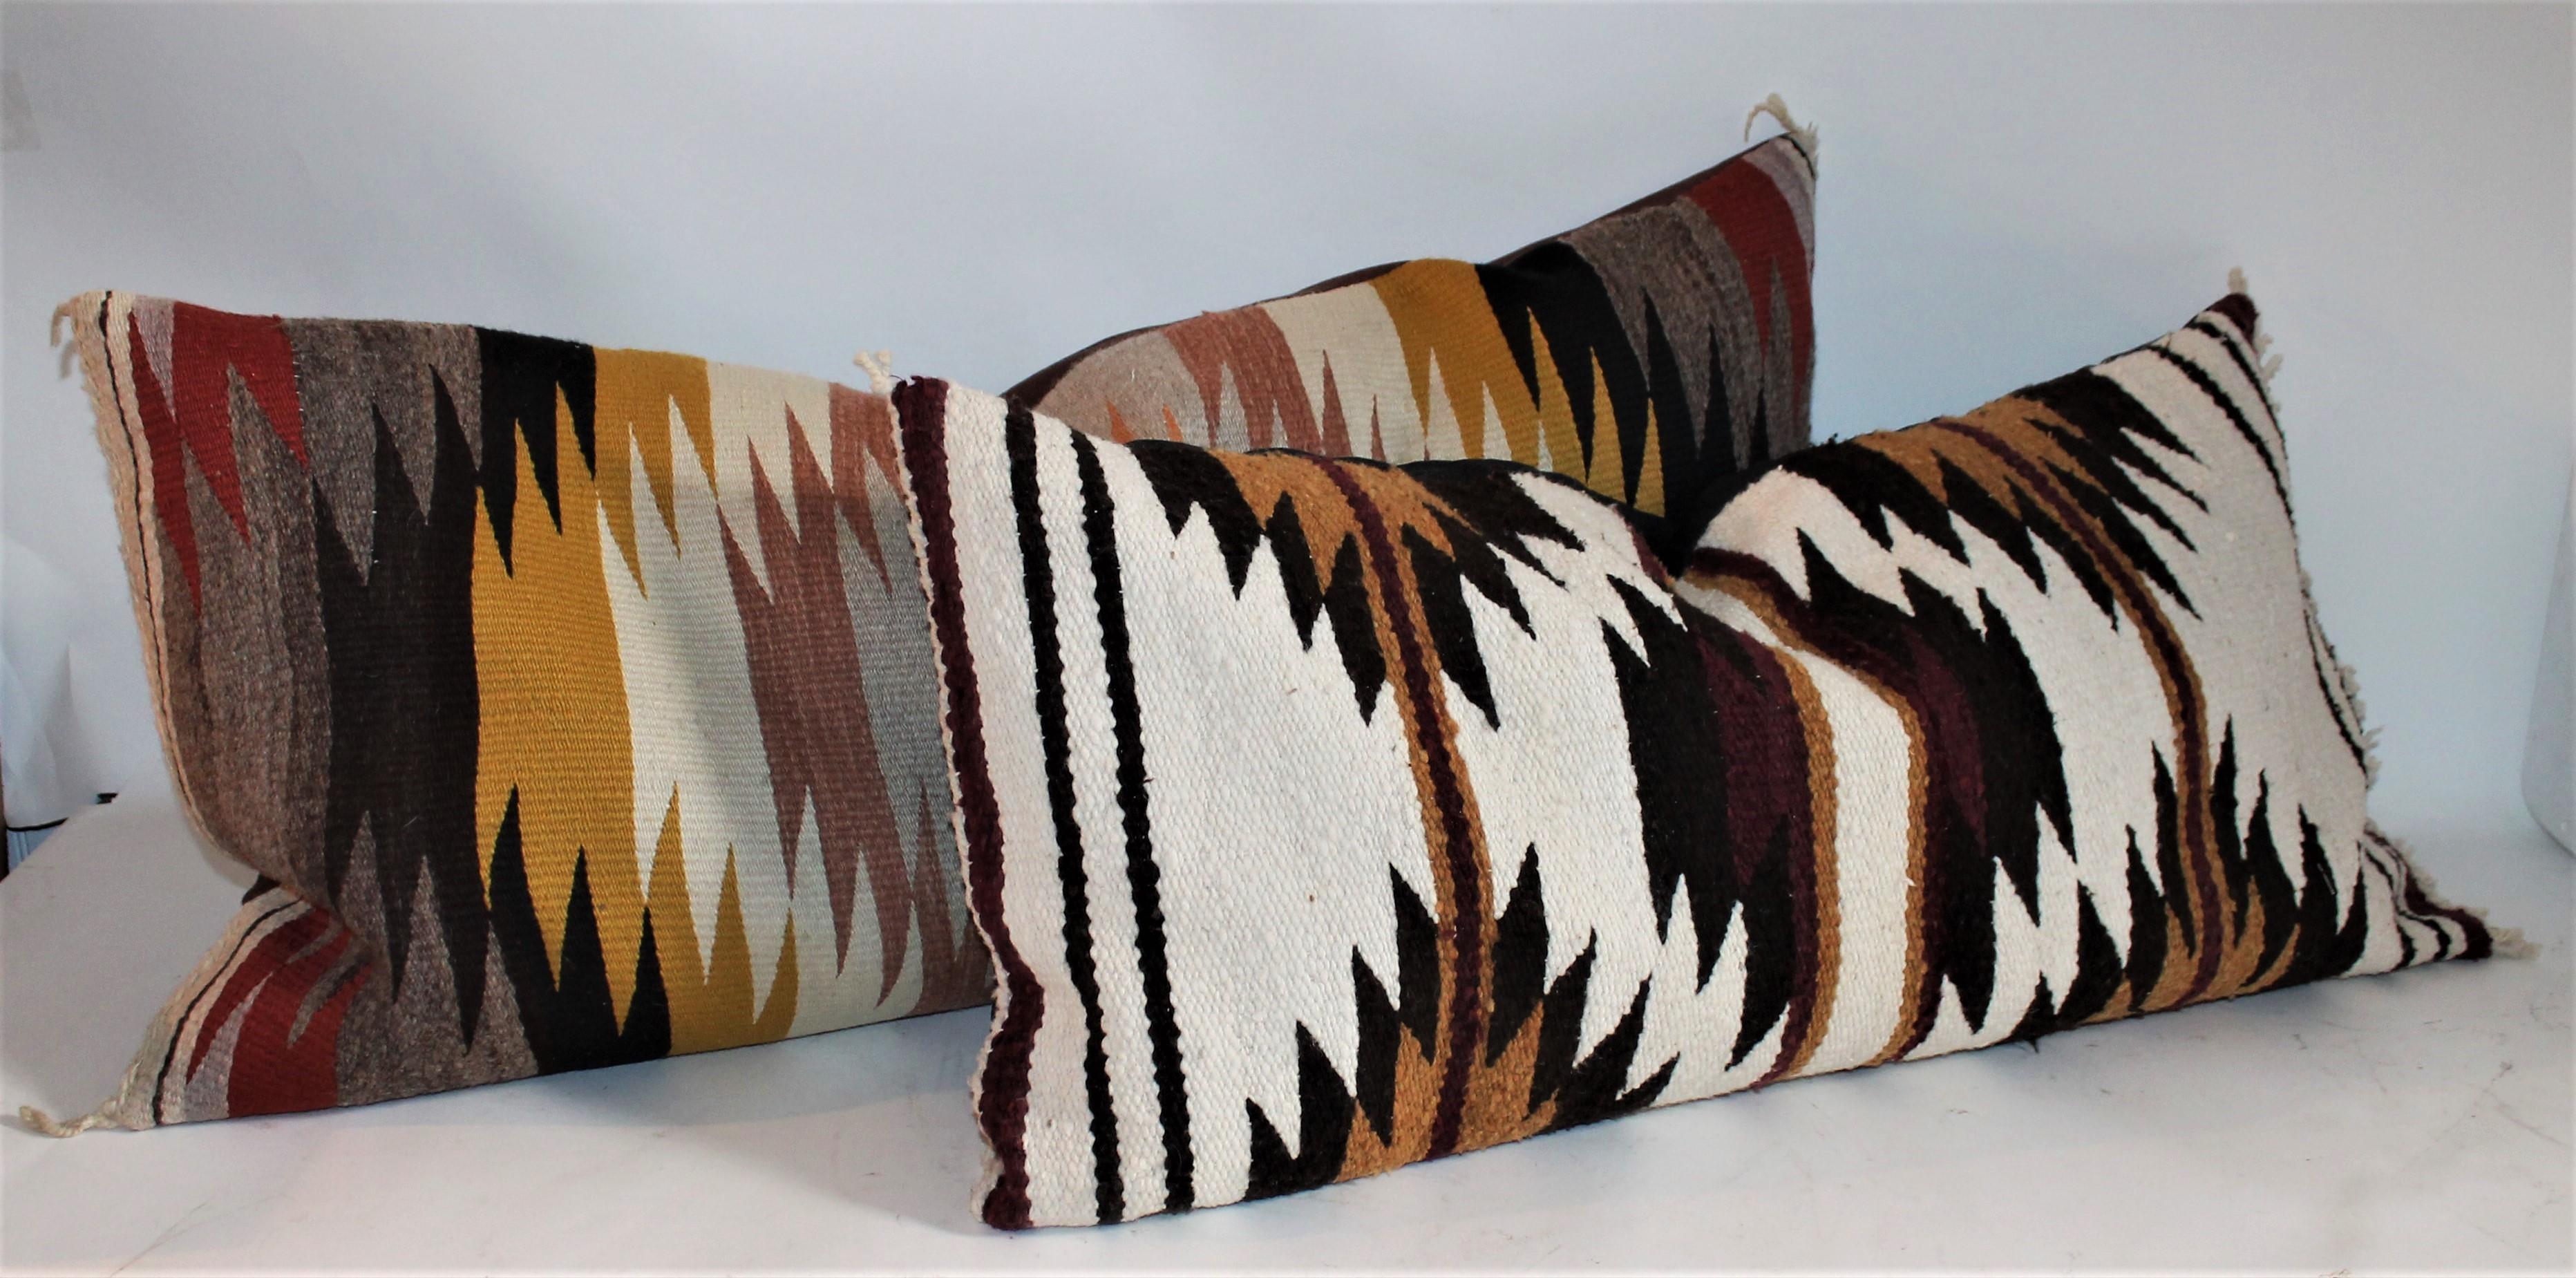 Navajo Indian weaving bolster pillows in fine condition. These were originally saddle blanket weaving's. The backing is in cotton black and brown linen. The inserts are down and feather fill.

Measures: 33 x 17 - Smaller pillow 
37 x 18 - Larger